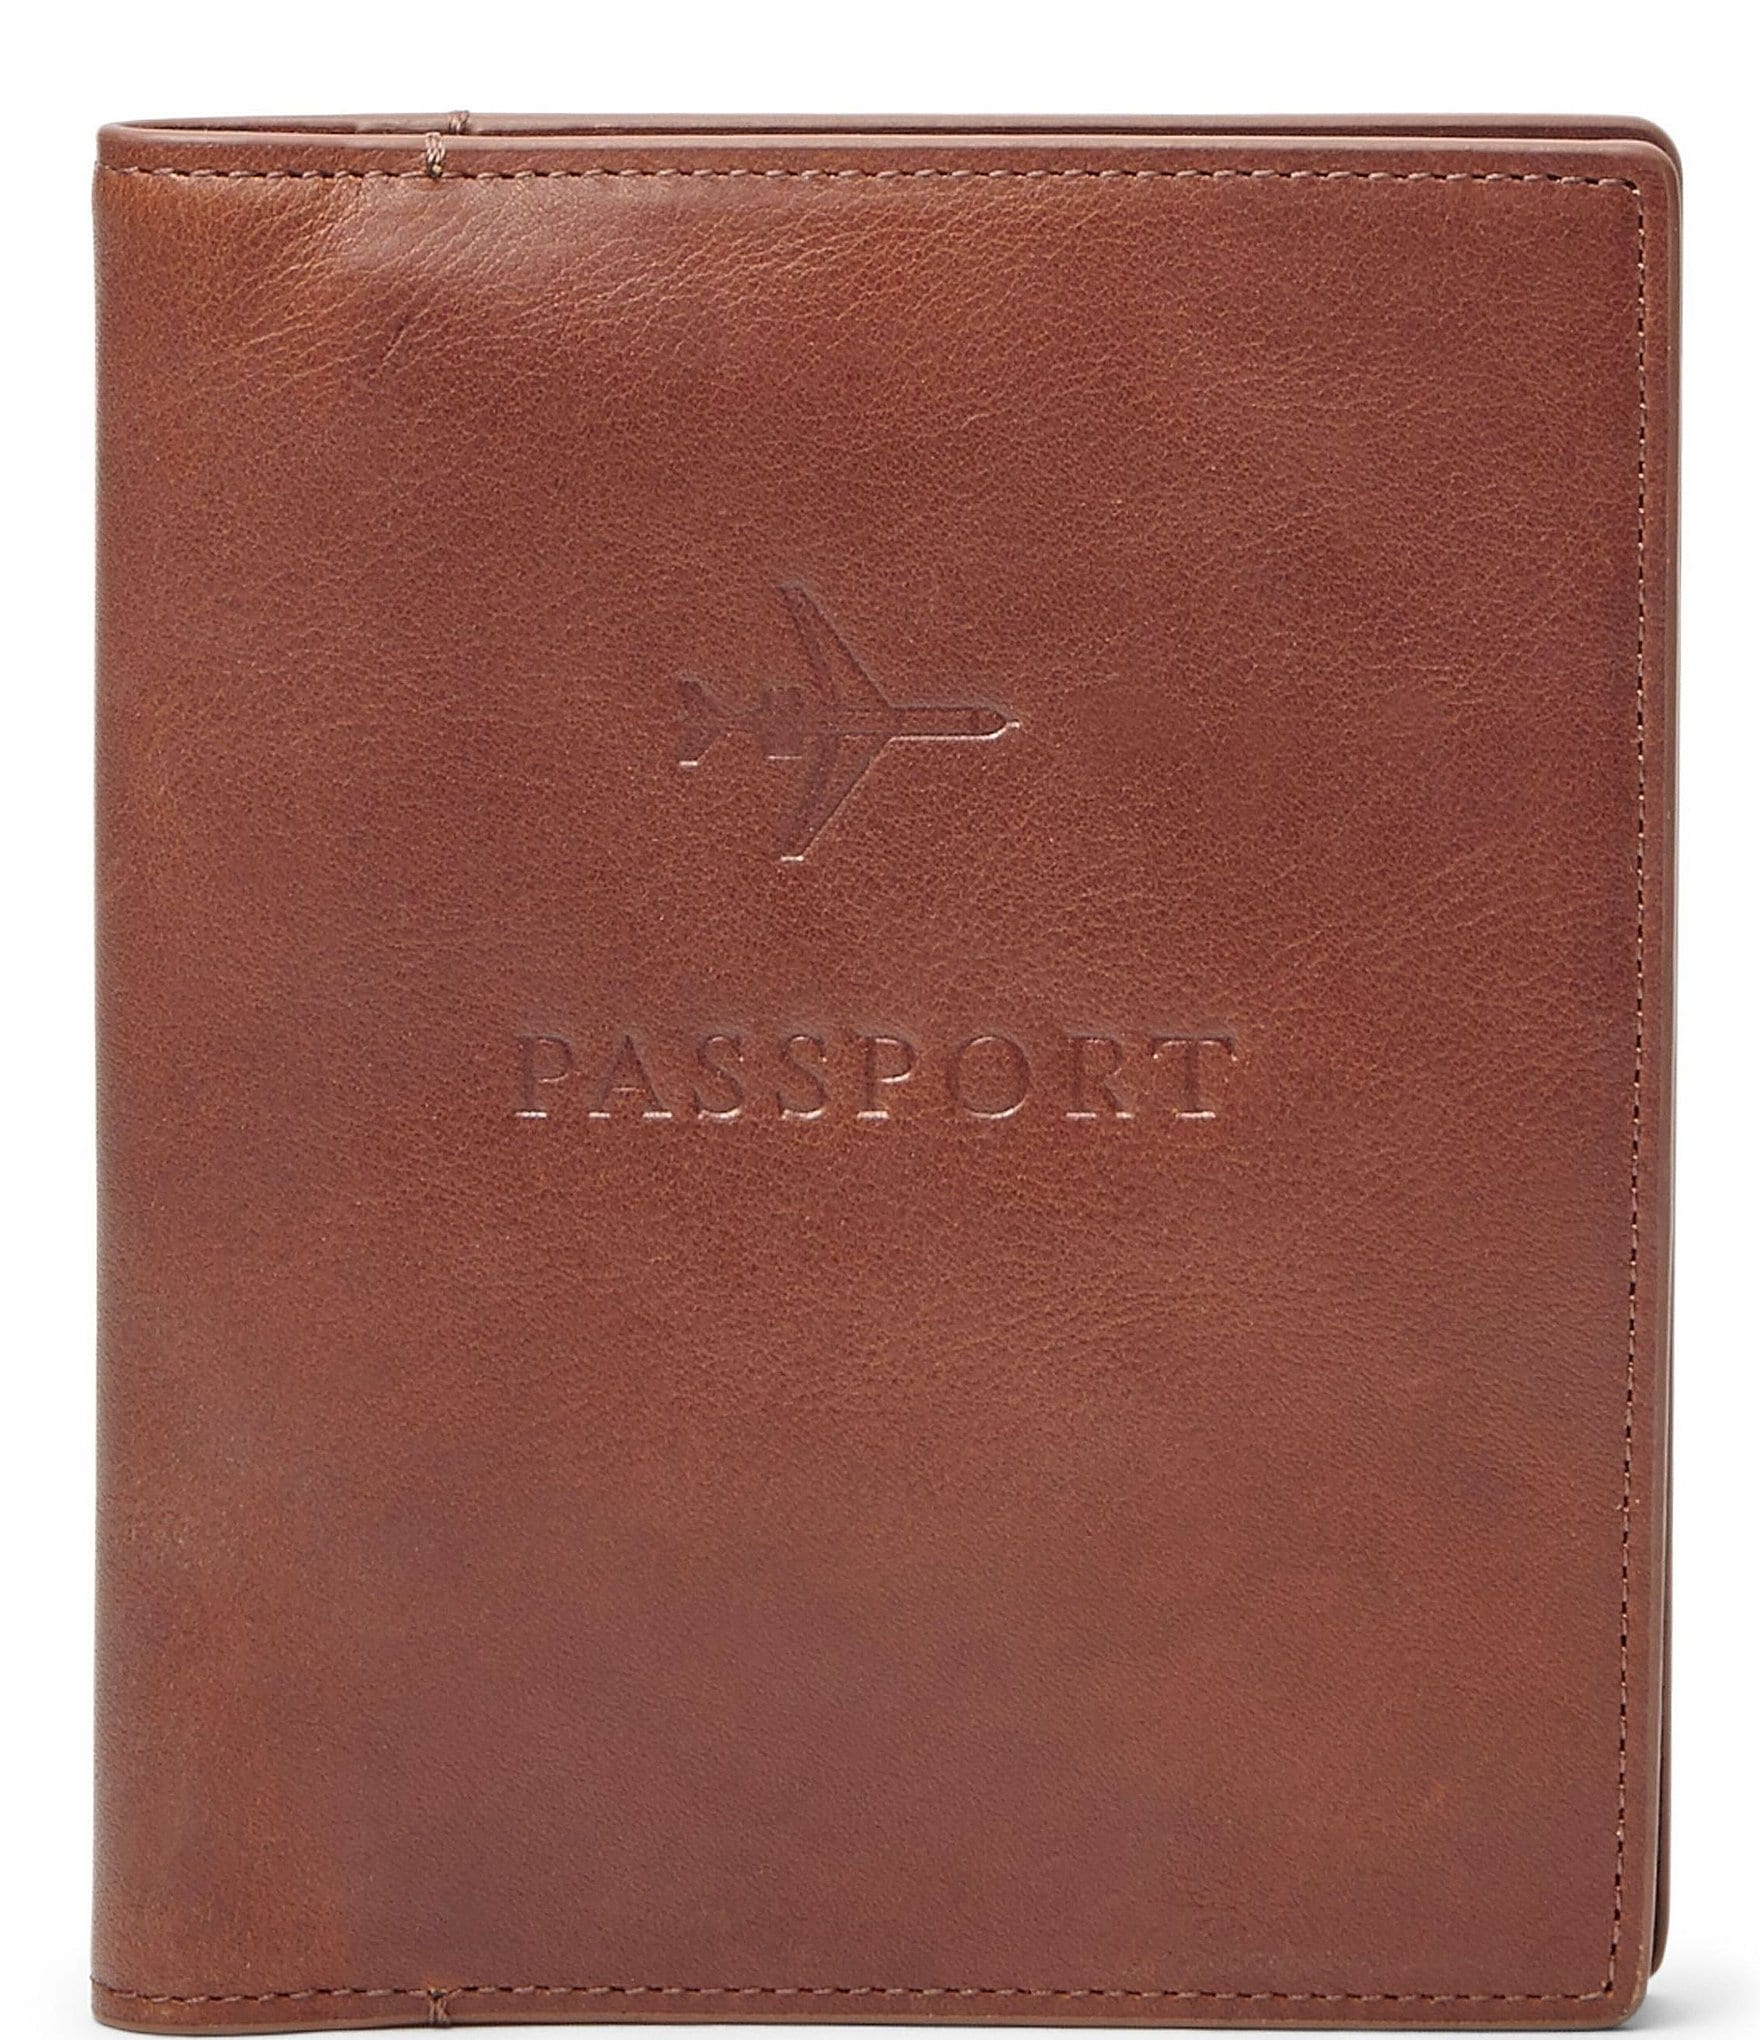 Westover L Zip Card Case - ML4594001 - Fossil